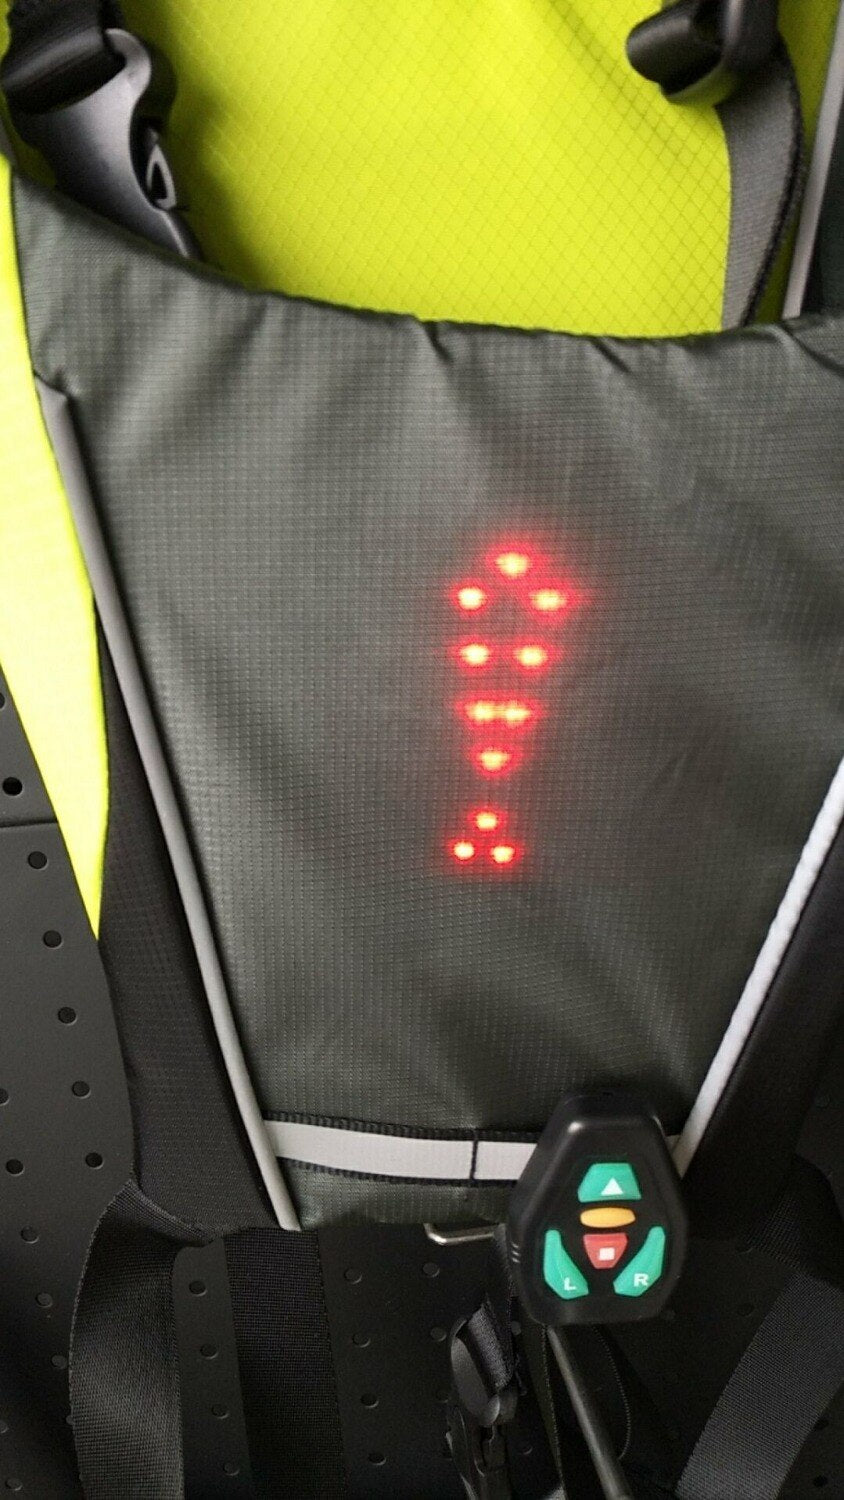 Cycling Bicycle Vest LED Wireless Safety Turn Signal Light Vest for Bicycle Riding Night Warning Backpack Guiding Light - SportsGO